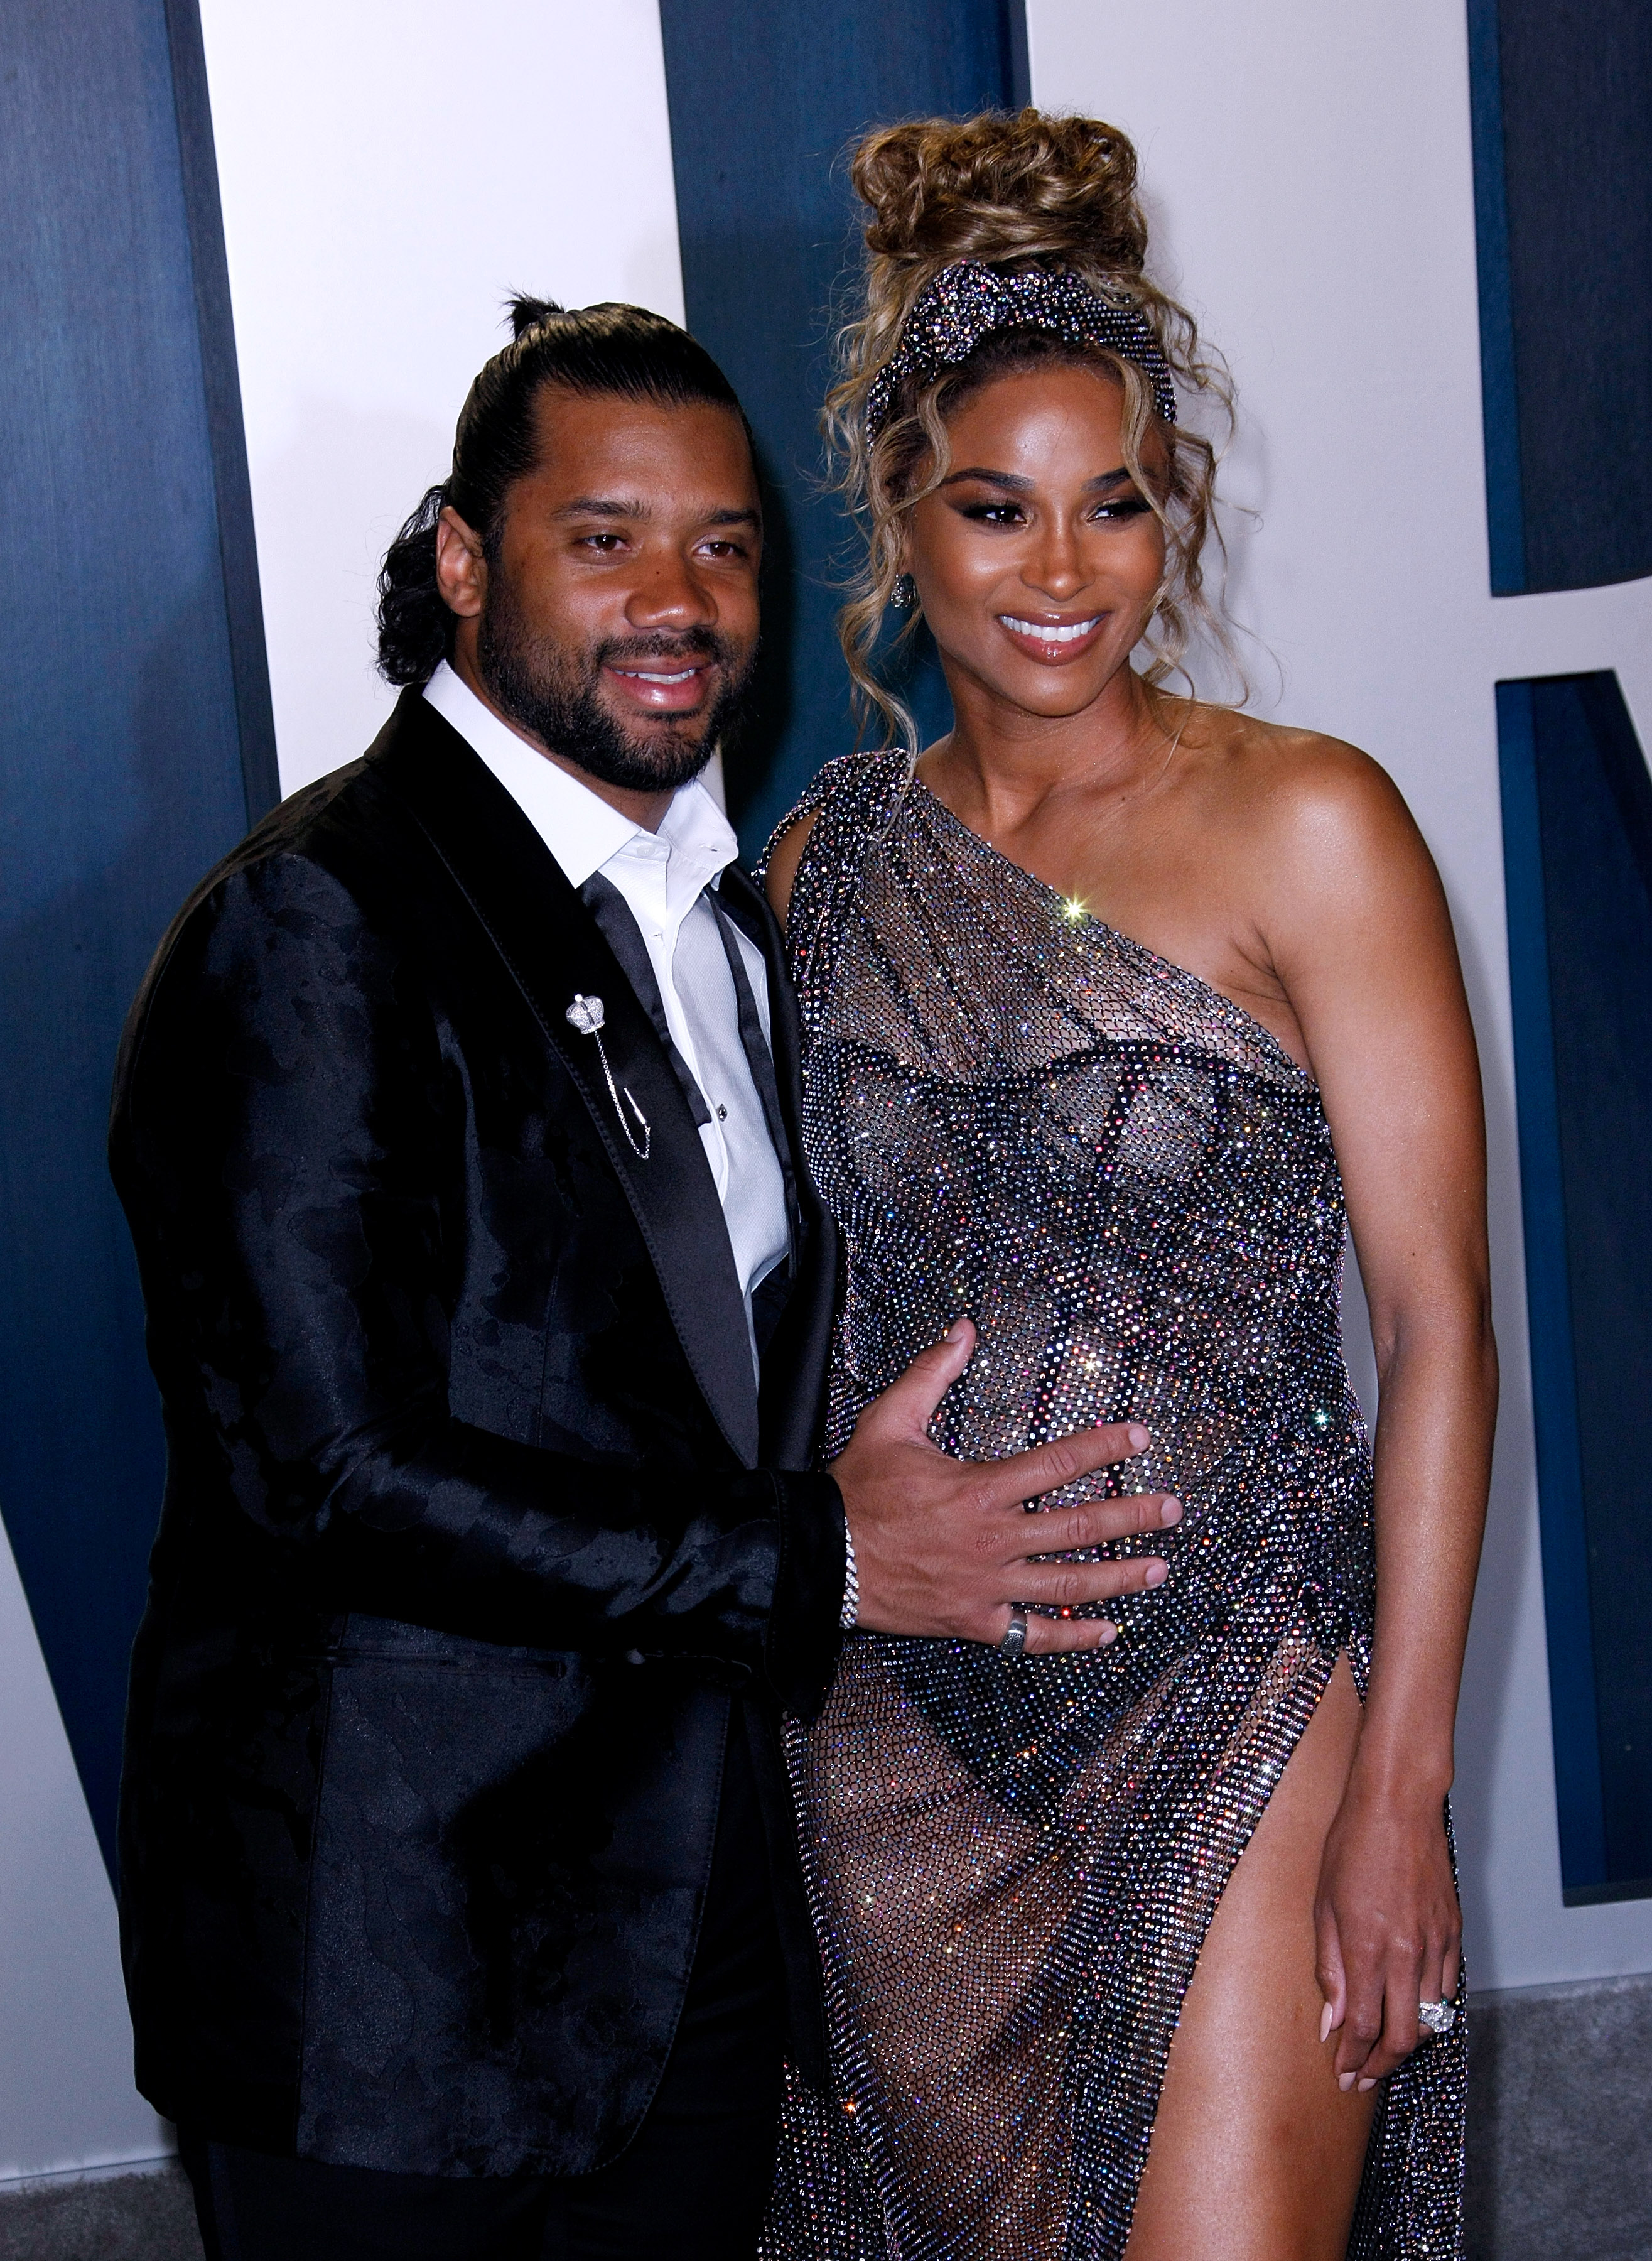 Russell Wilson Cradles Ciara's Baby Bump at Oscars Afterparty: Photos